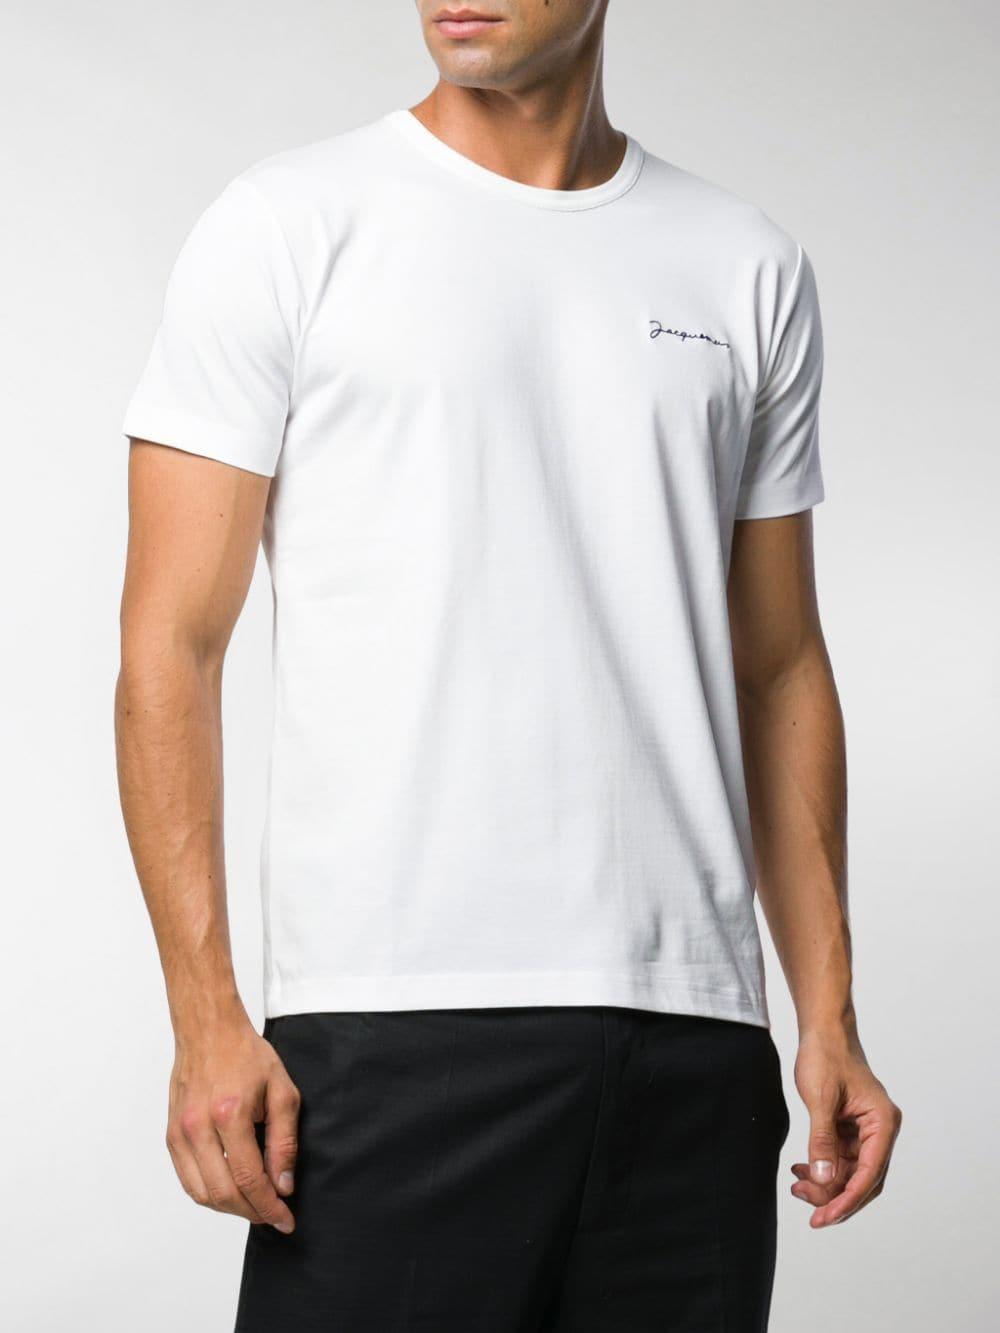 Jacquemus Logo Embroidered T-shirt in White for Men - Lyst